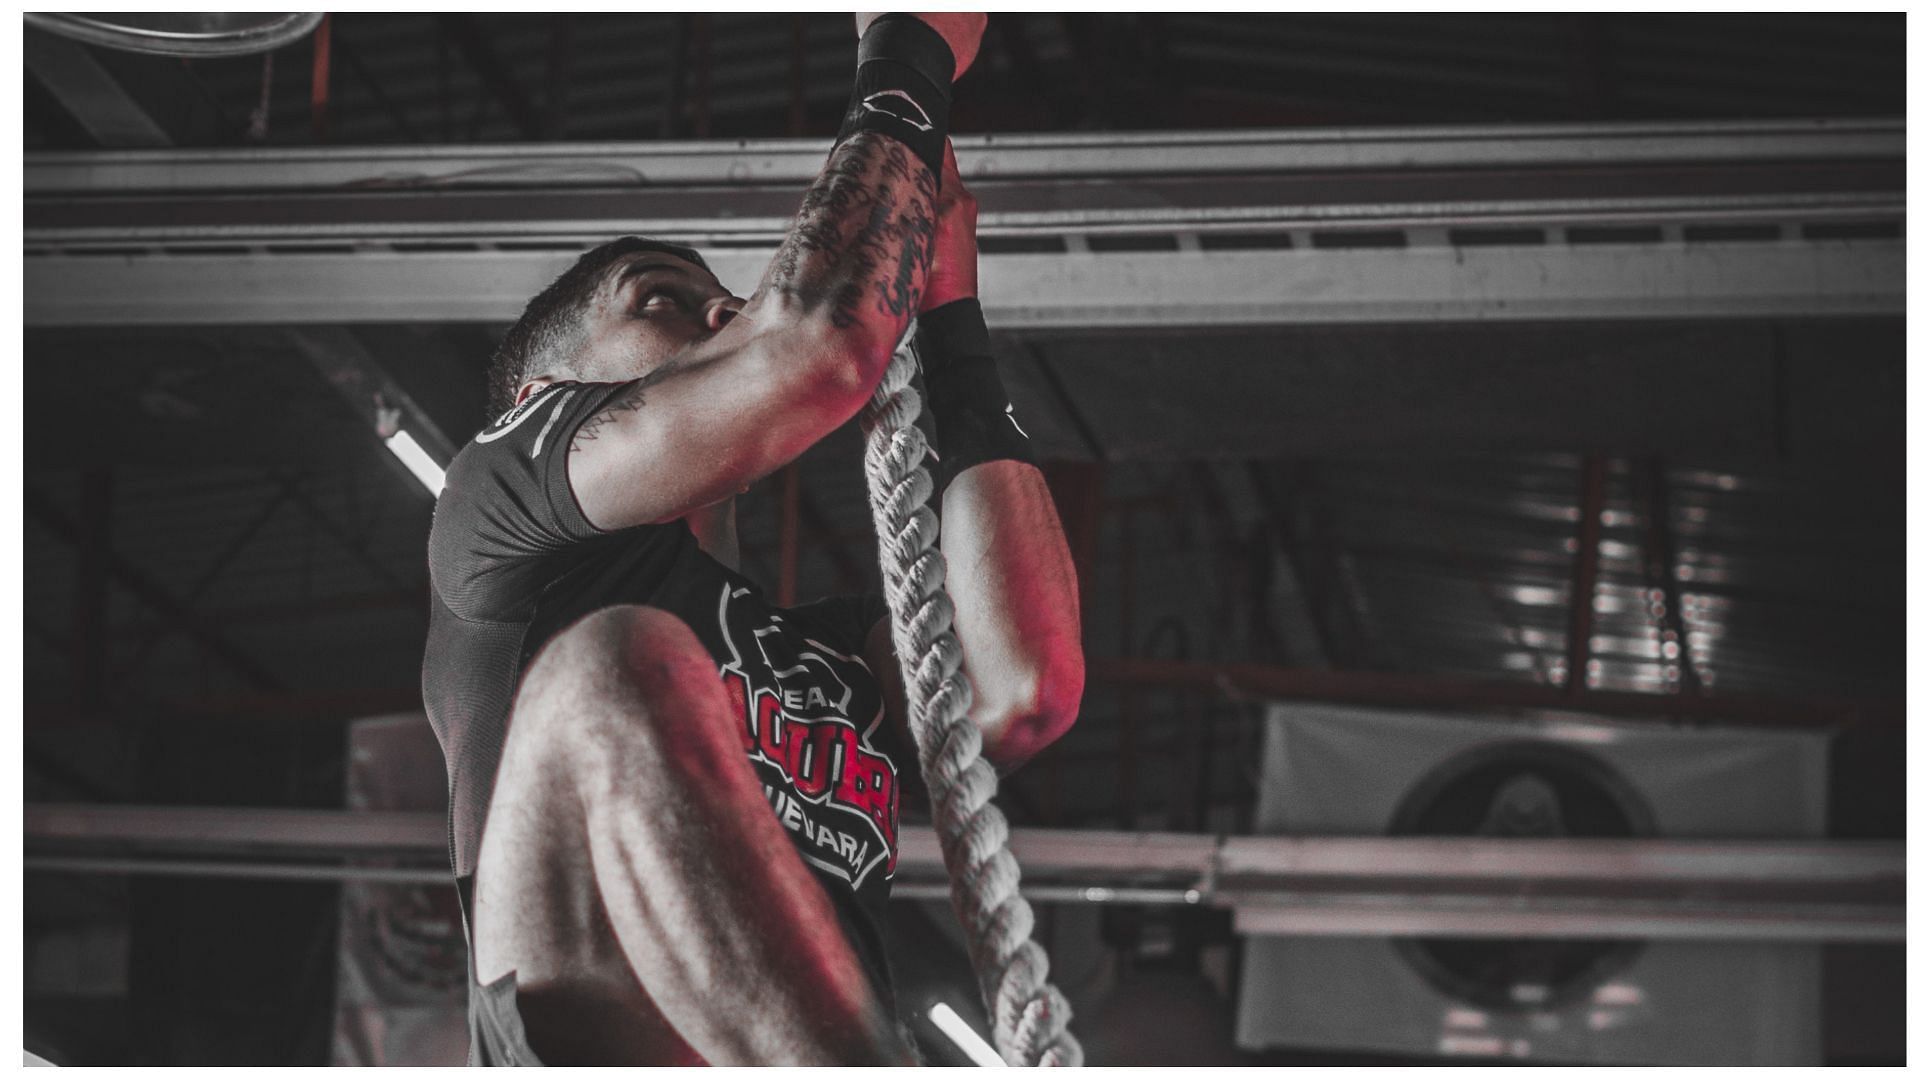 With practice and subsequent progressions, the rope climbing can be learned easily. (Image via Unsplash/ Leon Ardho)